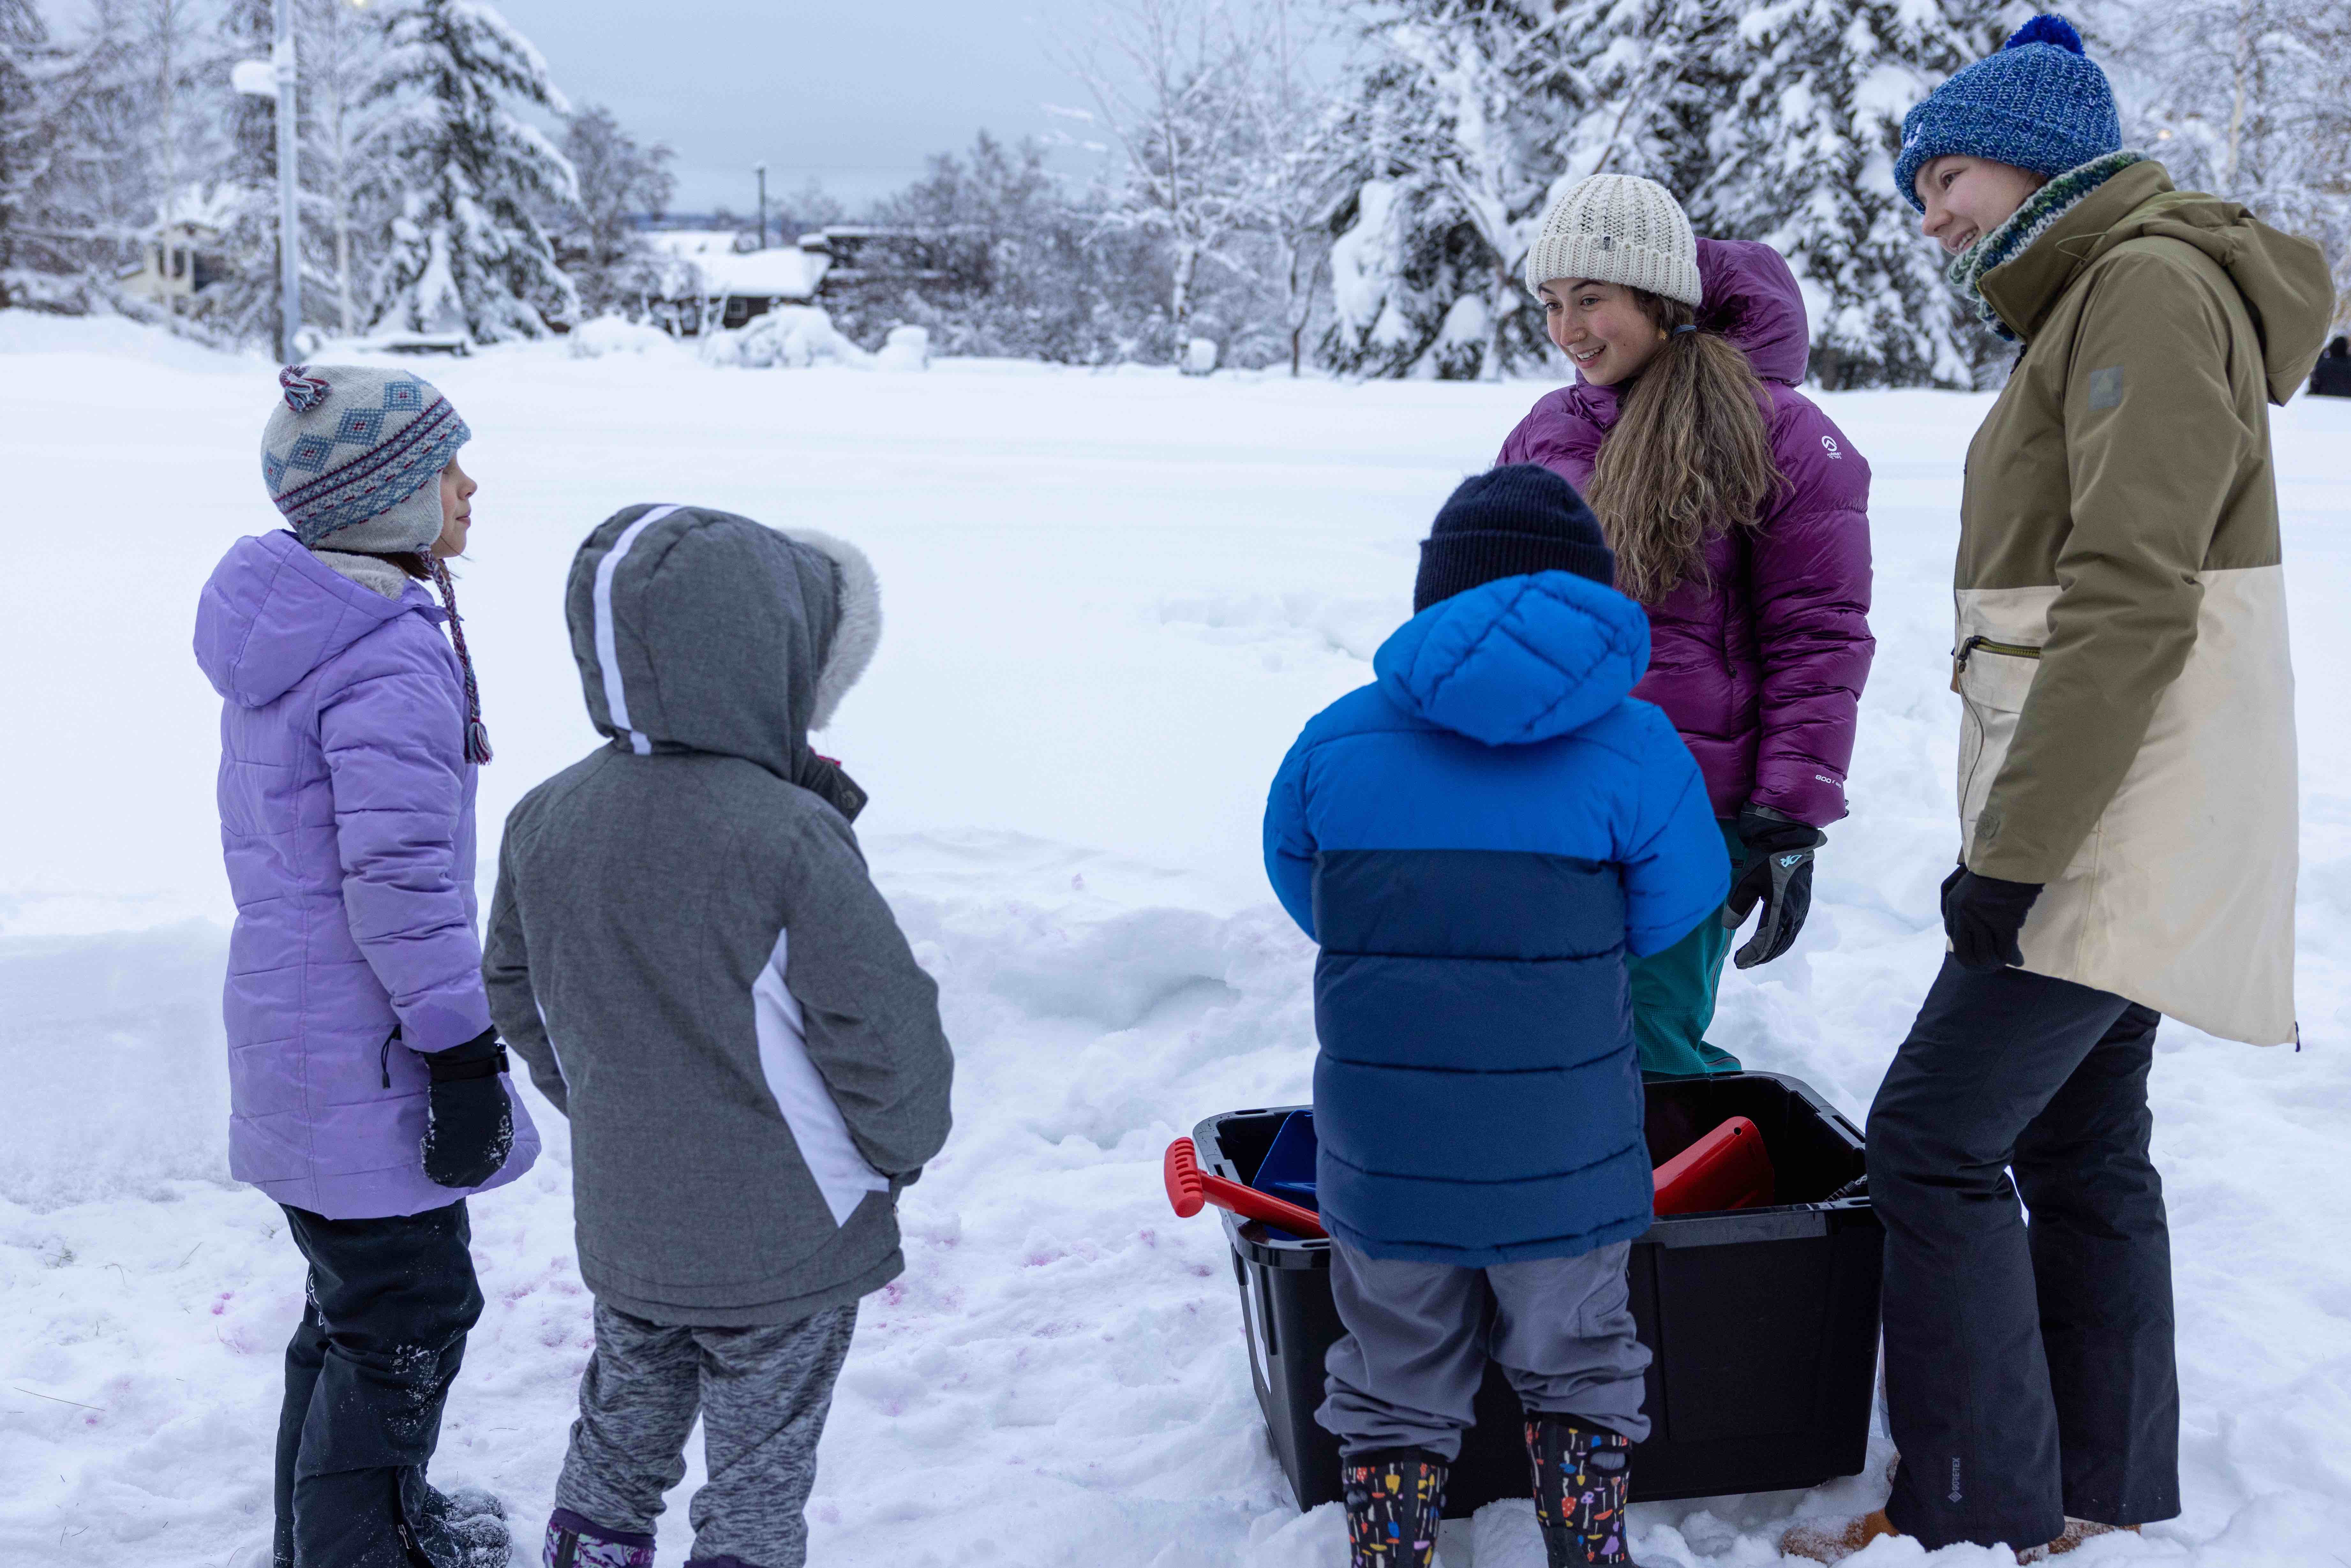 Children learning about snow